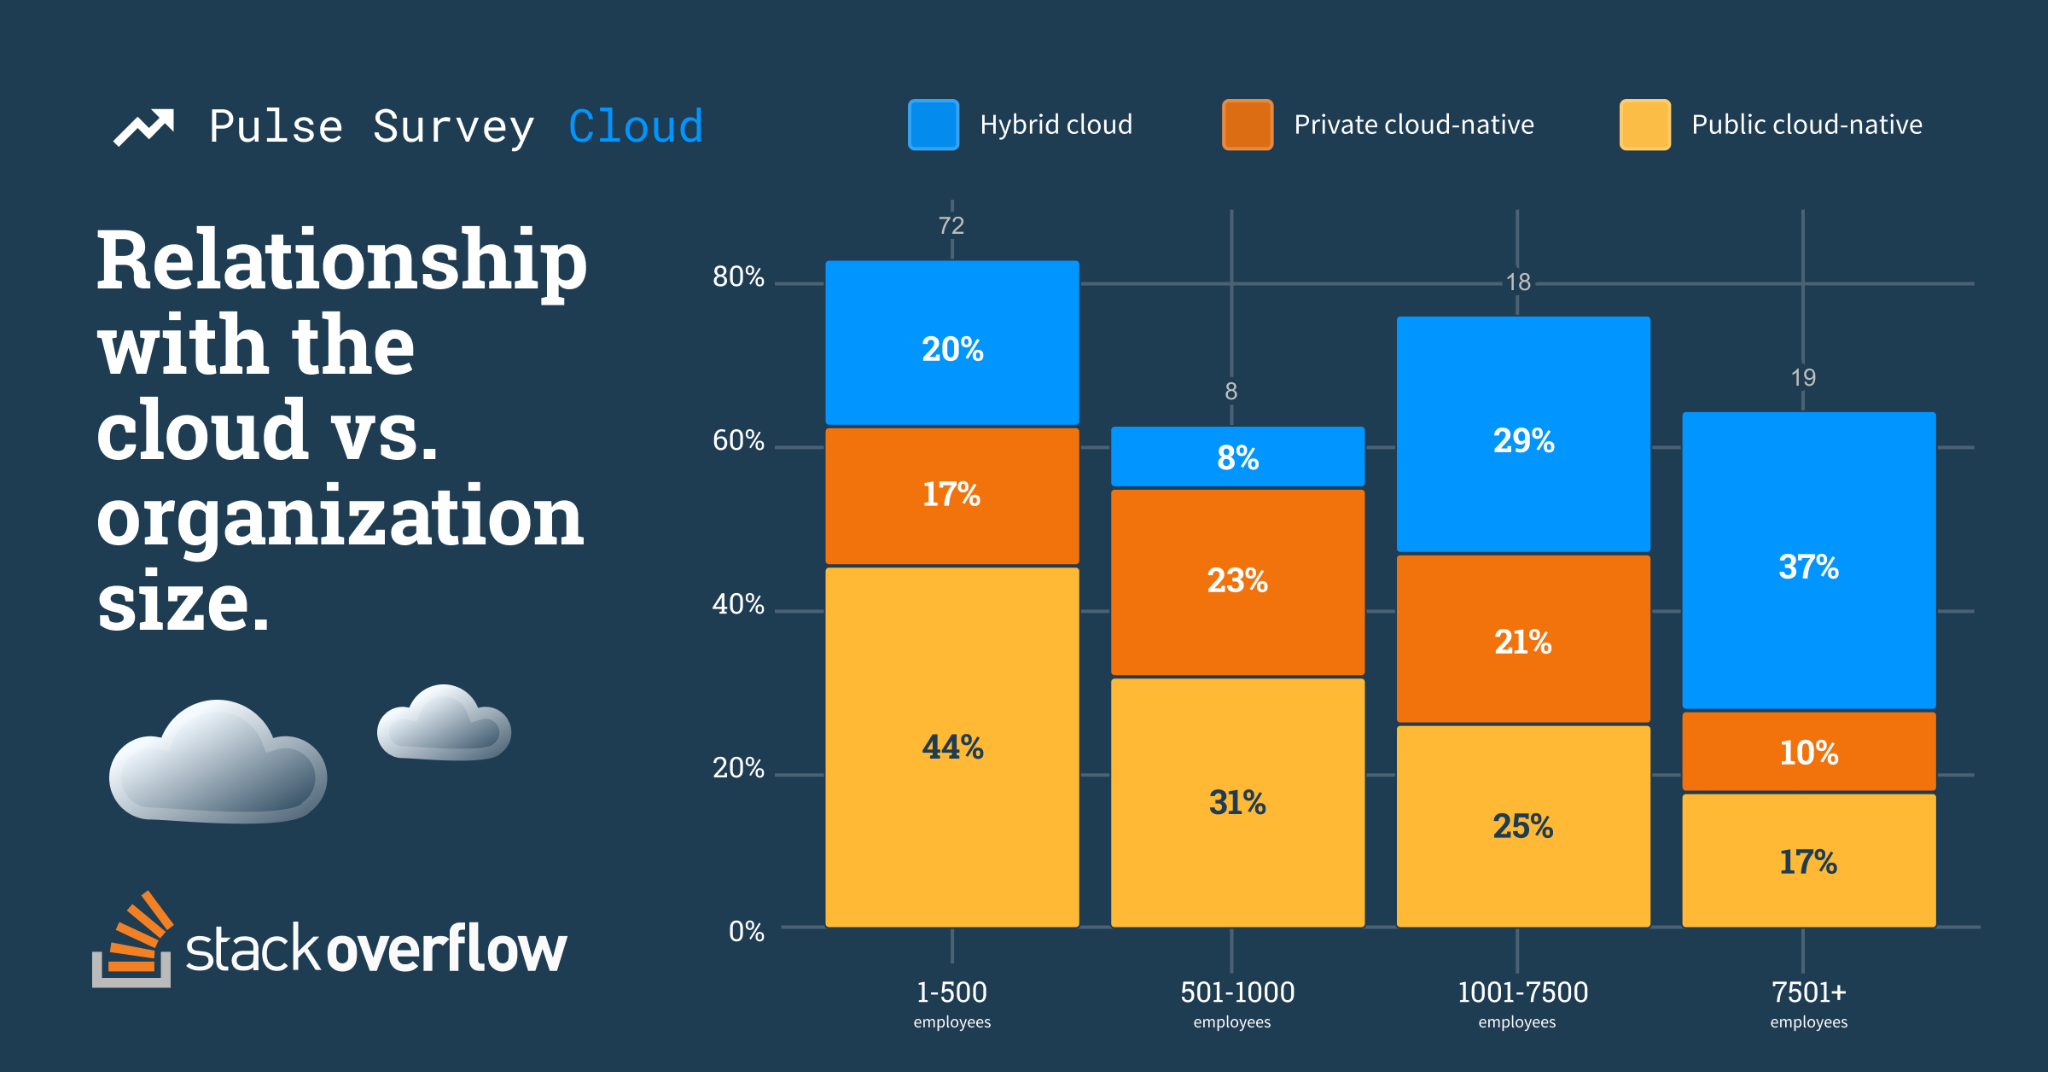 Stacked bar chart showing organization size and relationship with the cloud. 1-500 employee organizations, 72 respondents, 44% public cloud-native, 17% private cloud-native, 20% hybrid cloud. 501-500 employee organization, 8 respondents, 31% public cloud-native, 23% private cloud-native, 8% hybrid cloud. 1001-7500 employee organizations, 18 respondents, 25% public cloud-native, 21% private cloud-native, 29% hybrid cloud. 7501+ employee organizations, 19 respondents, 17% public cloud-native, 10% private cloud-native, 37% hybrid cloud.